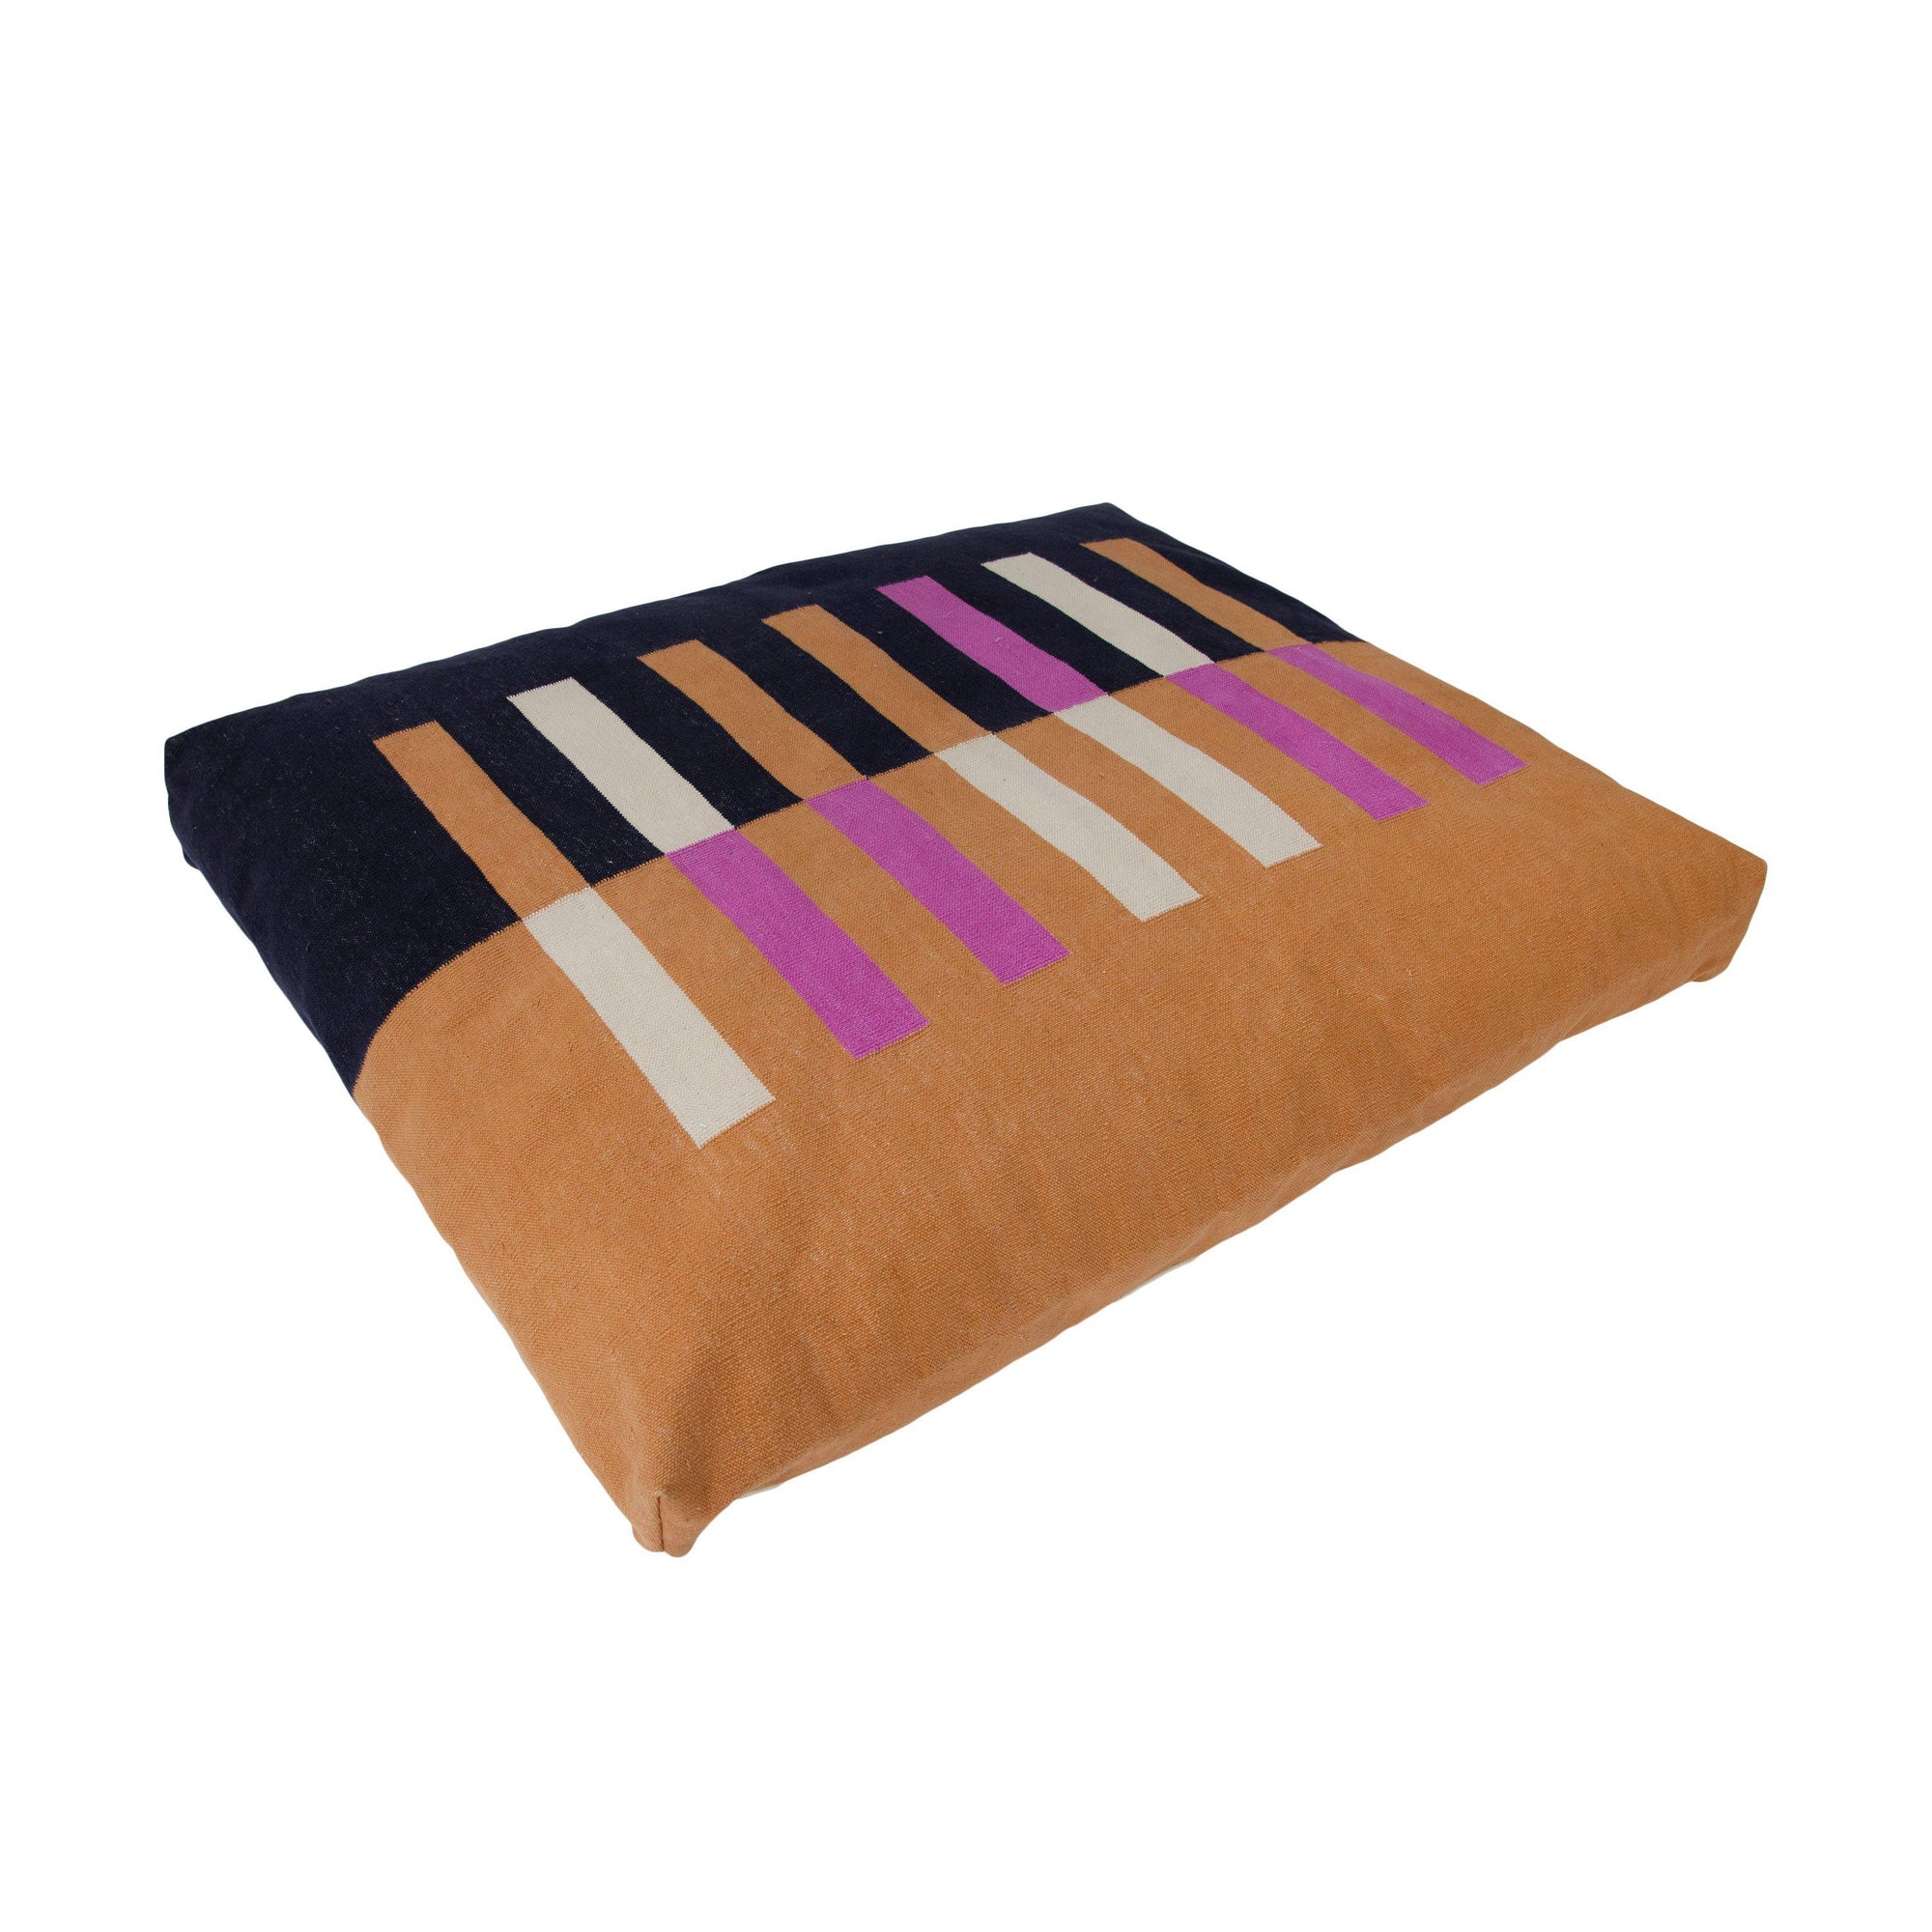 Rugs by Roo | Leah Singh Stripe Dog Bed-H18DOG02